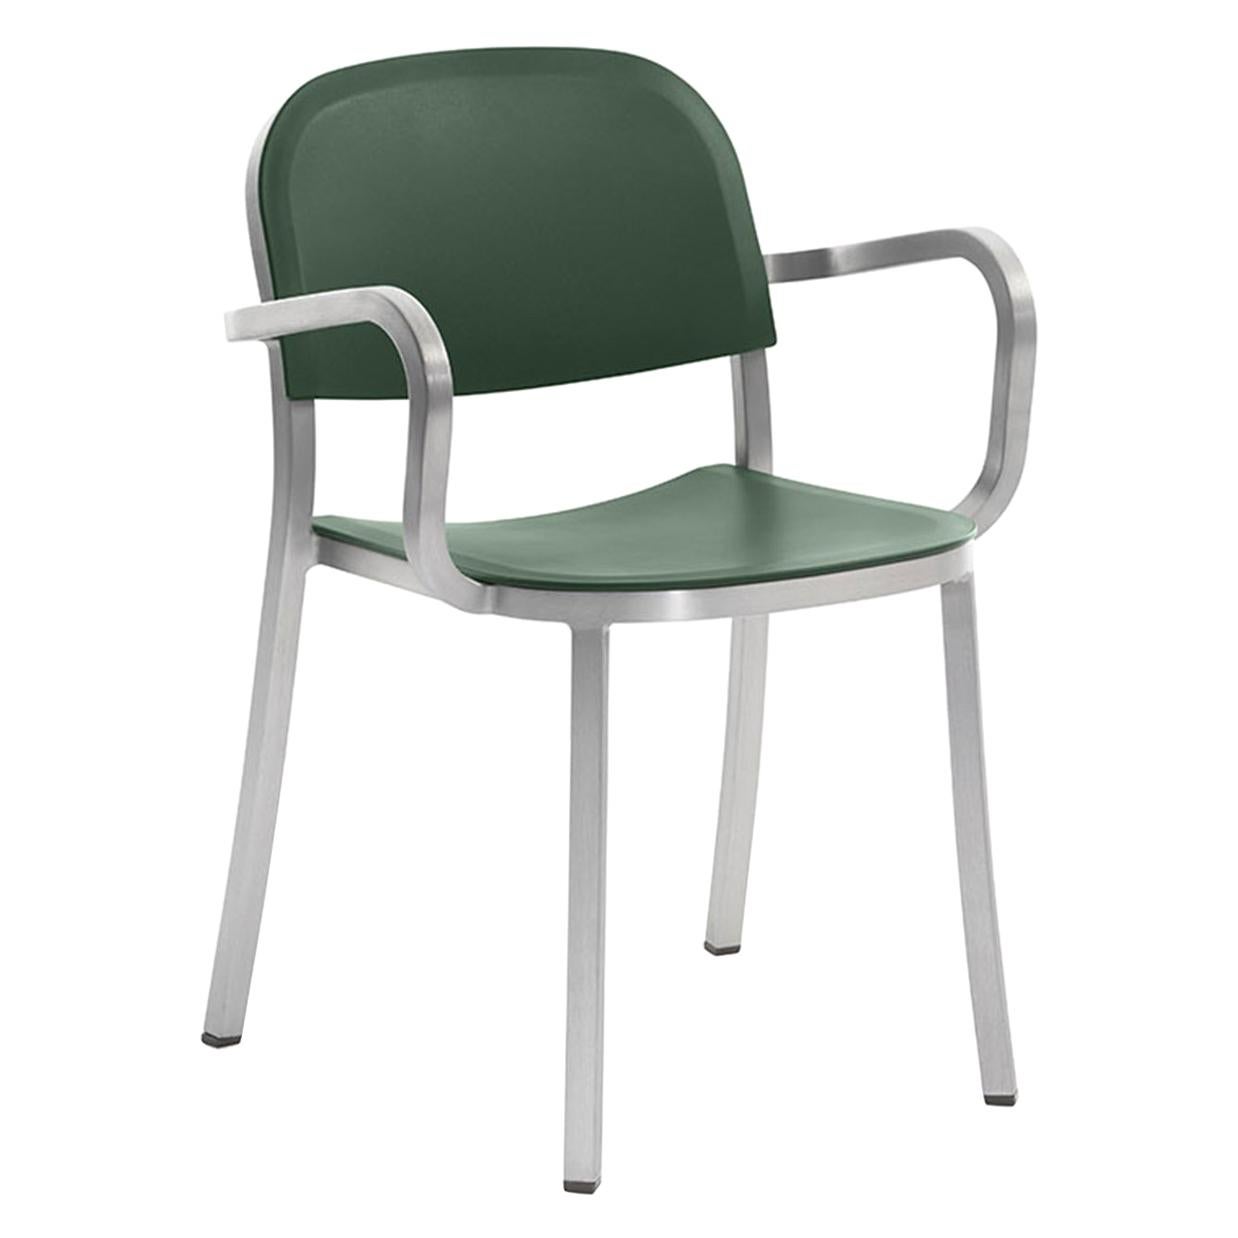 Emeco 1 Inch Armchair in Brushed Aluminum and Green by Jasper Morrison